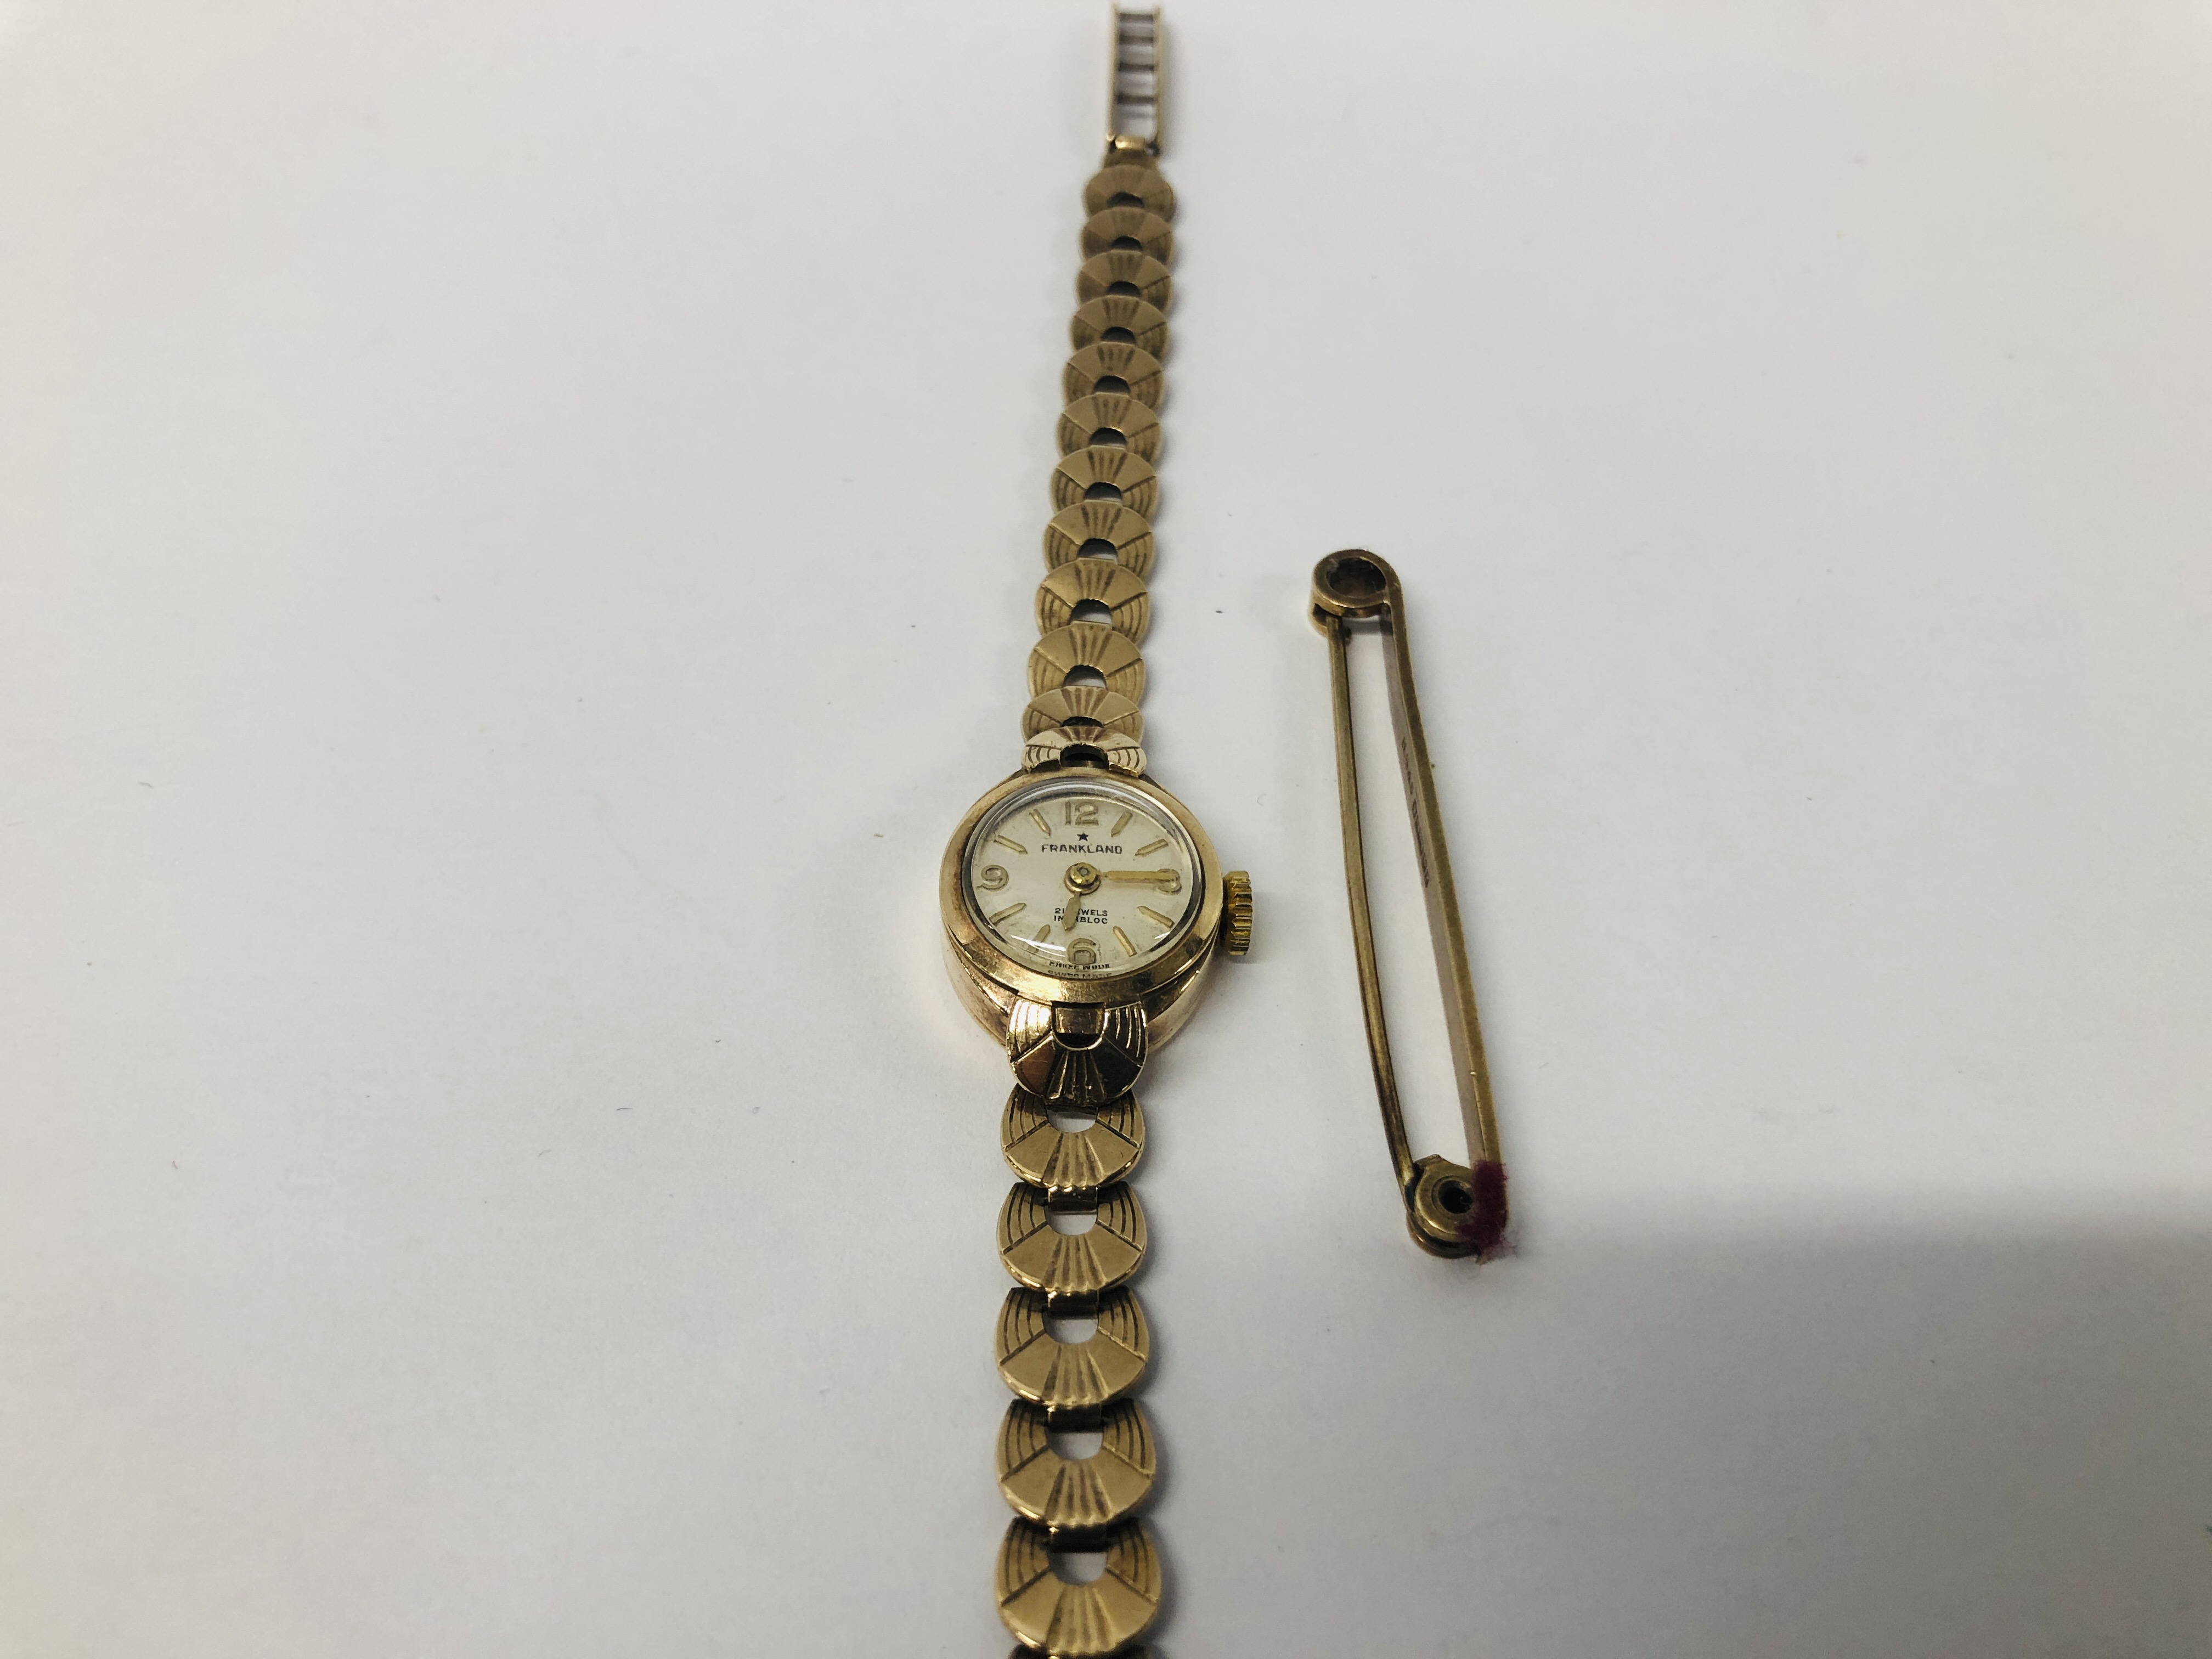 A LADIES 9CT GOLD CASED FRANKLAND WRIST WATCH ON 9CT GOLD BRACELET STRAP ALONG WITH A 9CT GOLD BAR - Image 5 of 14